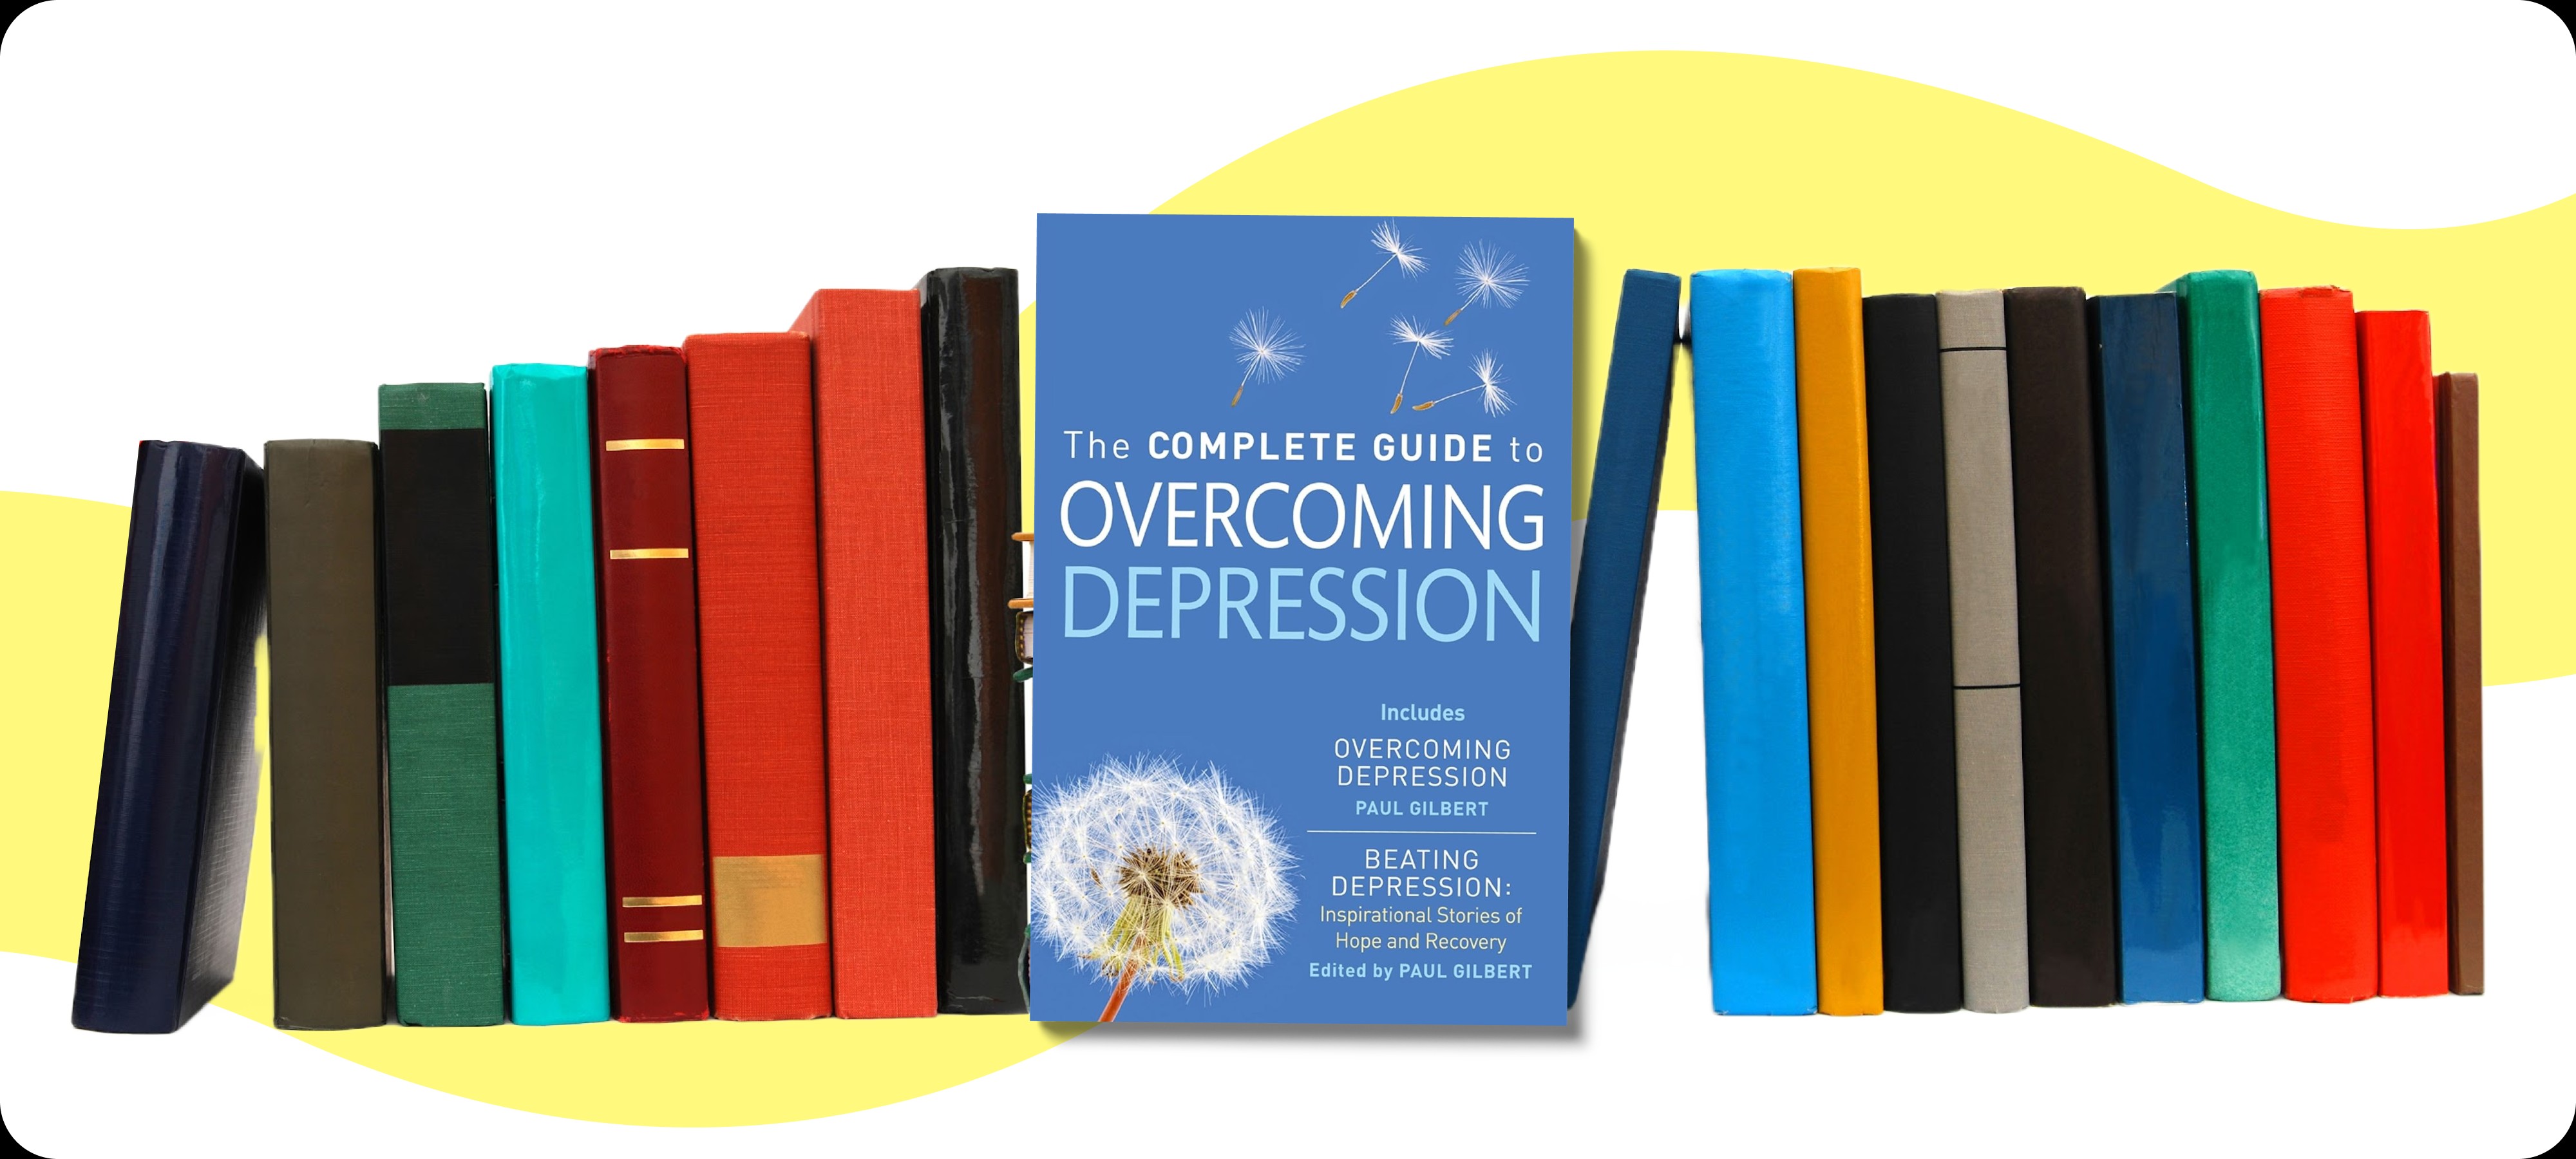 The Complete Guide to Overcoming Depression